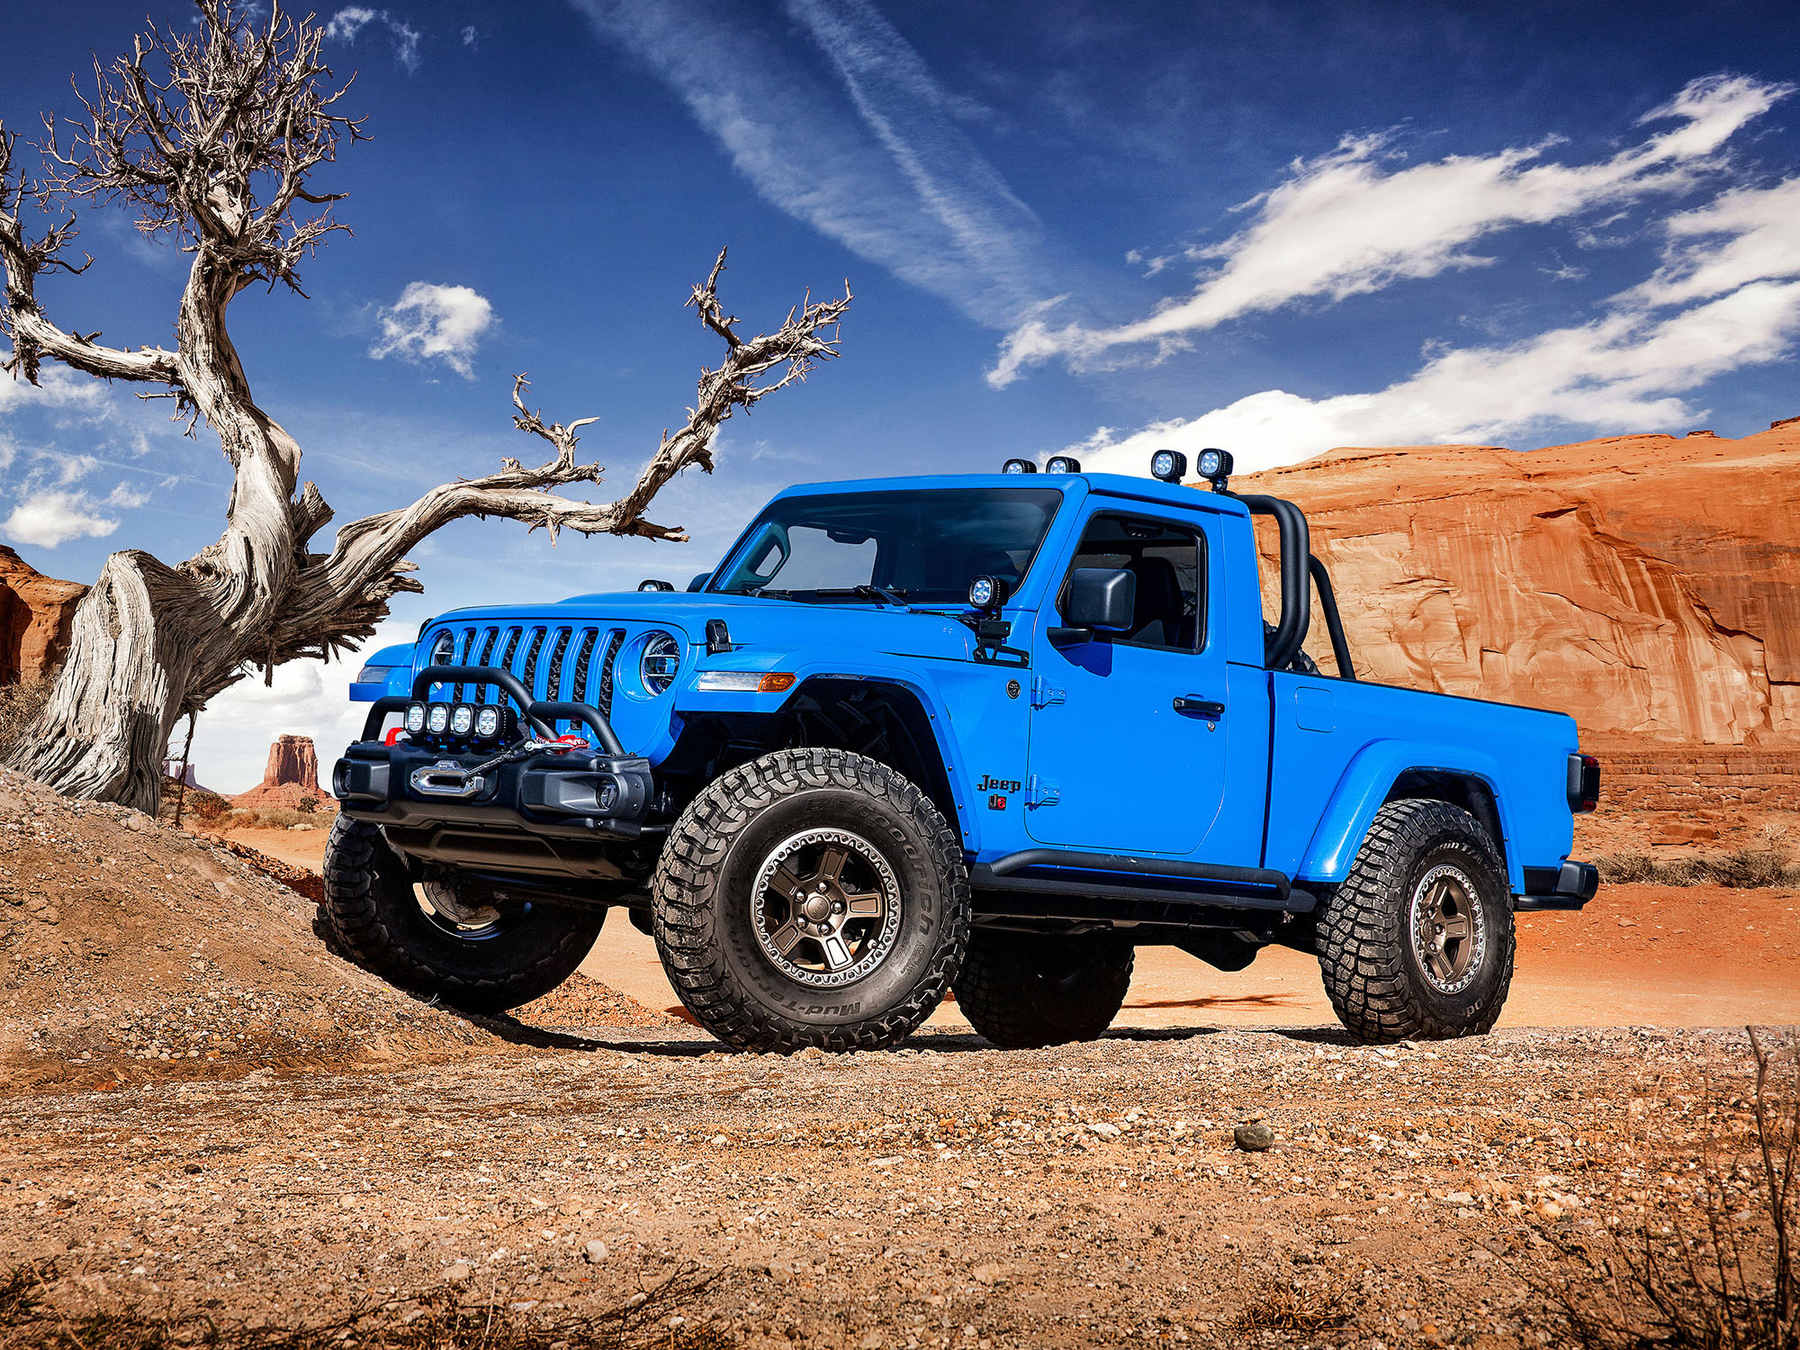 The Jeep J6 two-door truck concept in the dirt